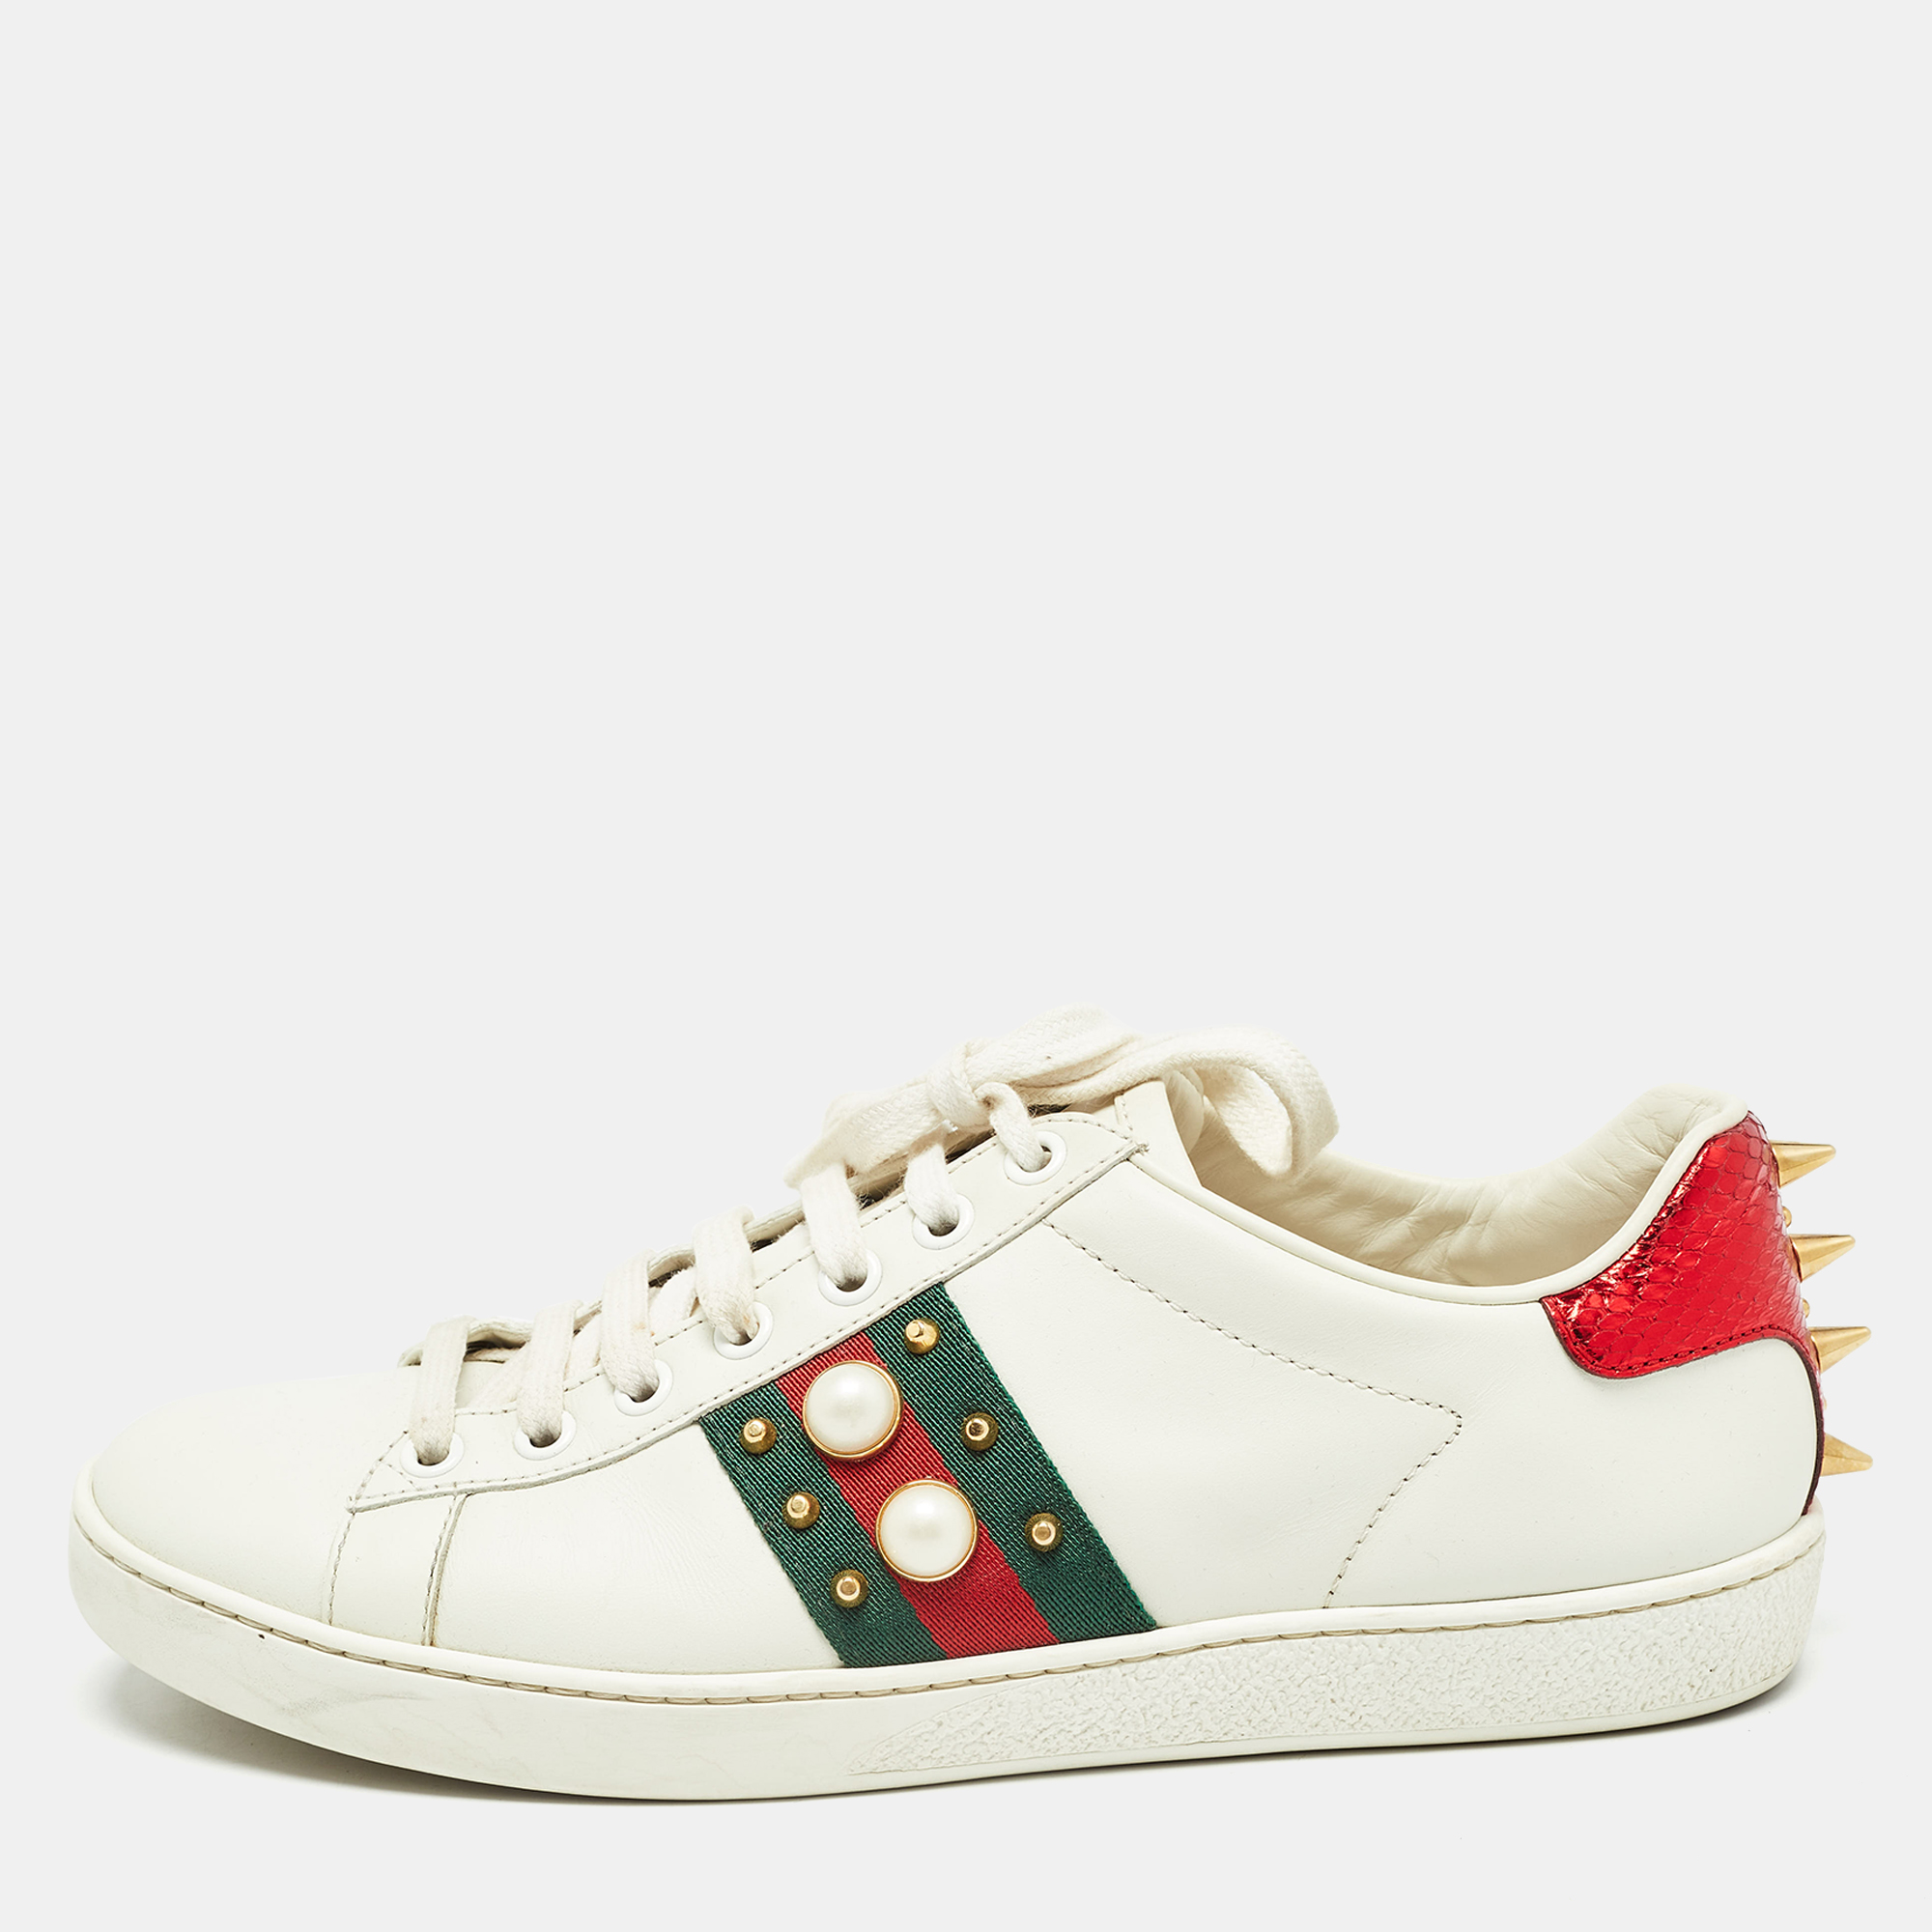 Gucci white leather studded and spiked ace sneakers size 37